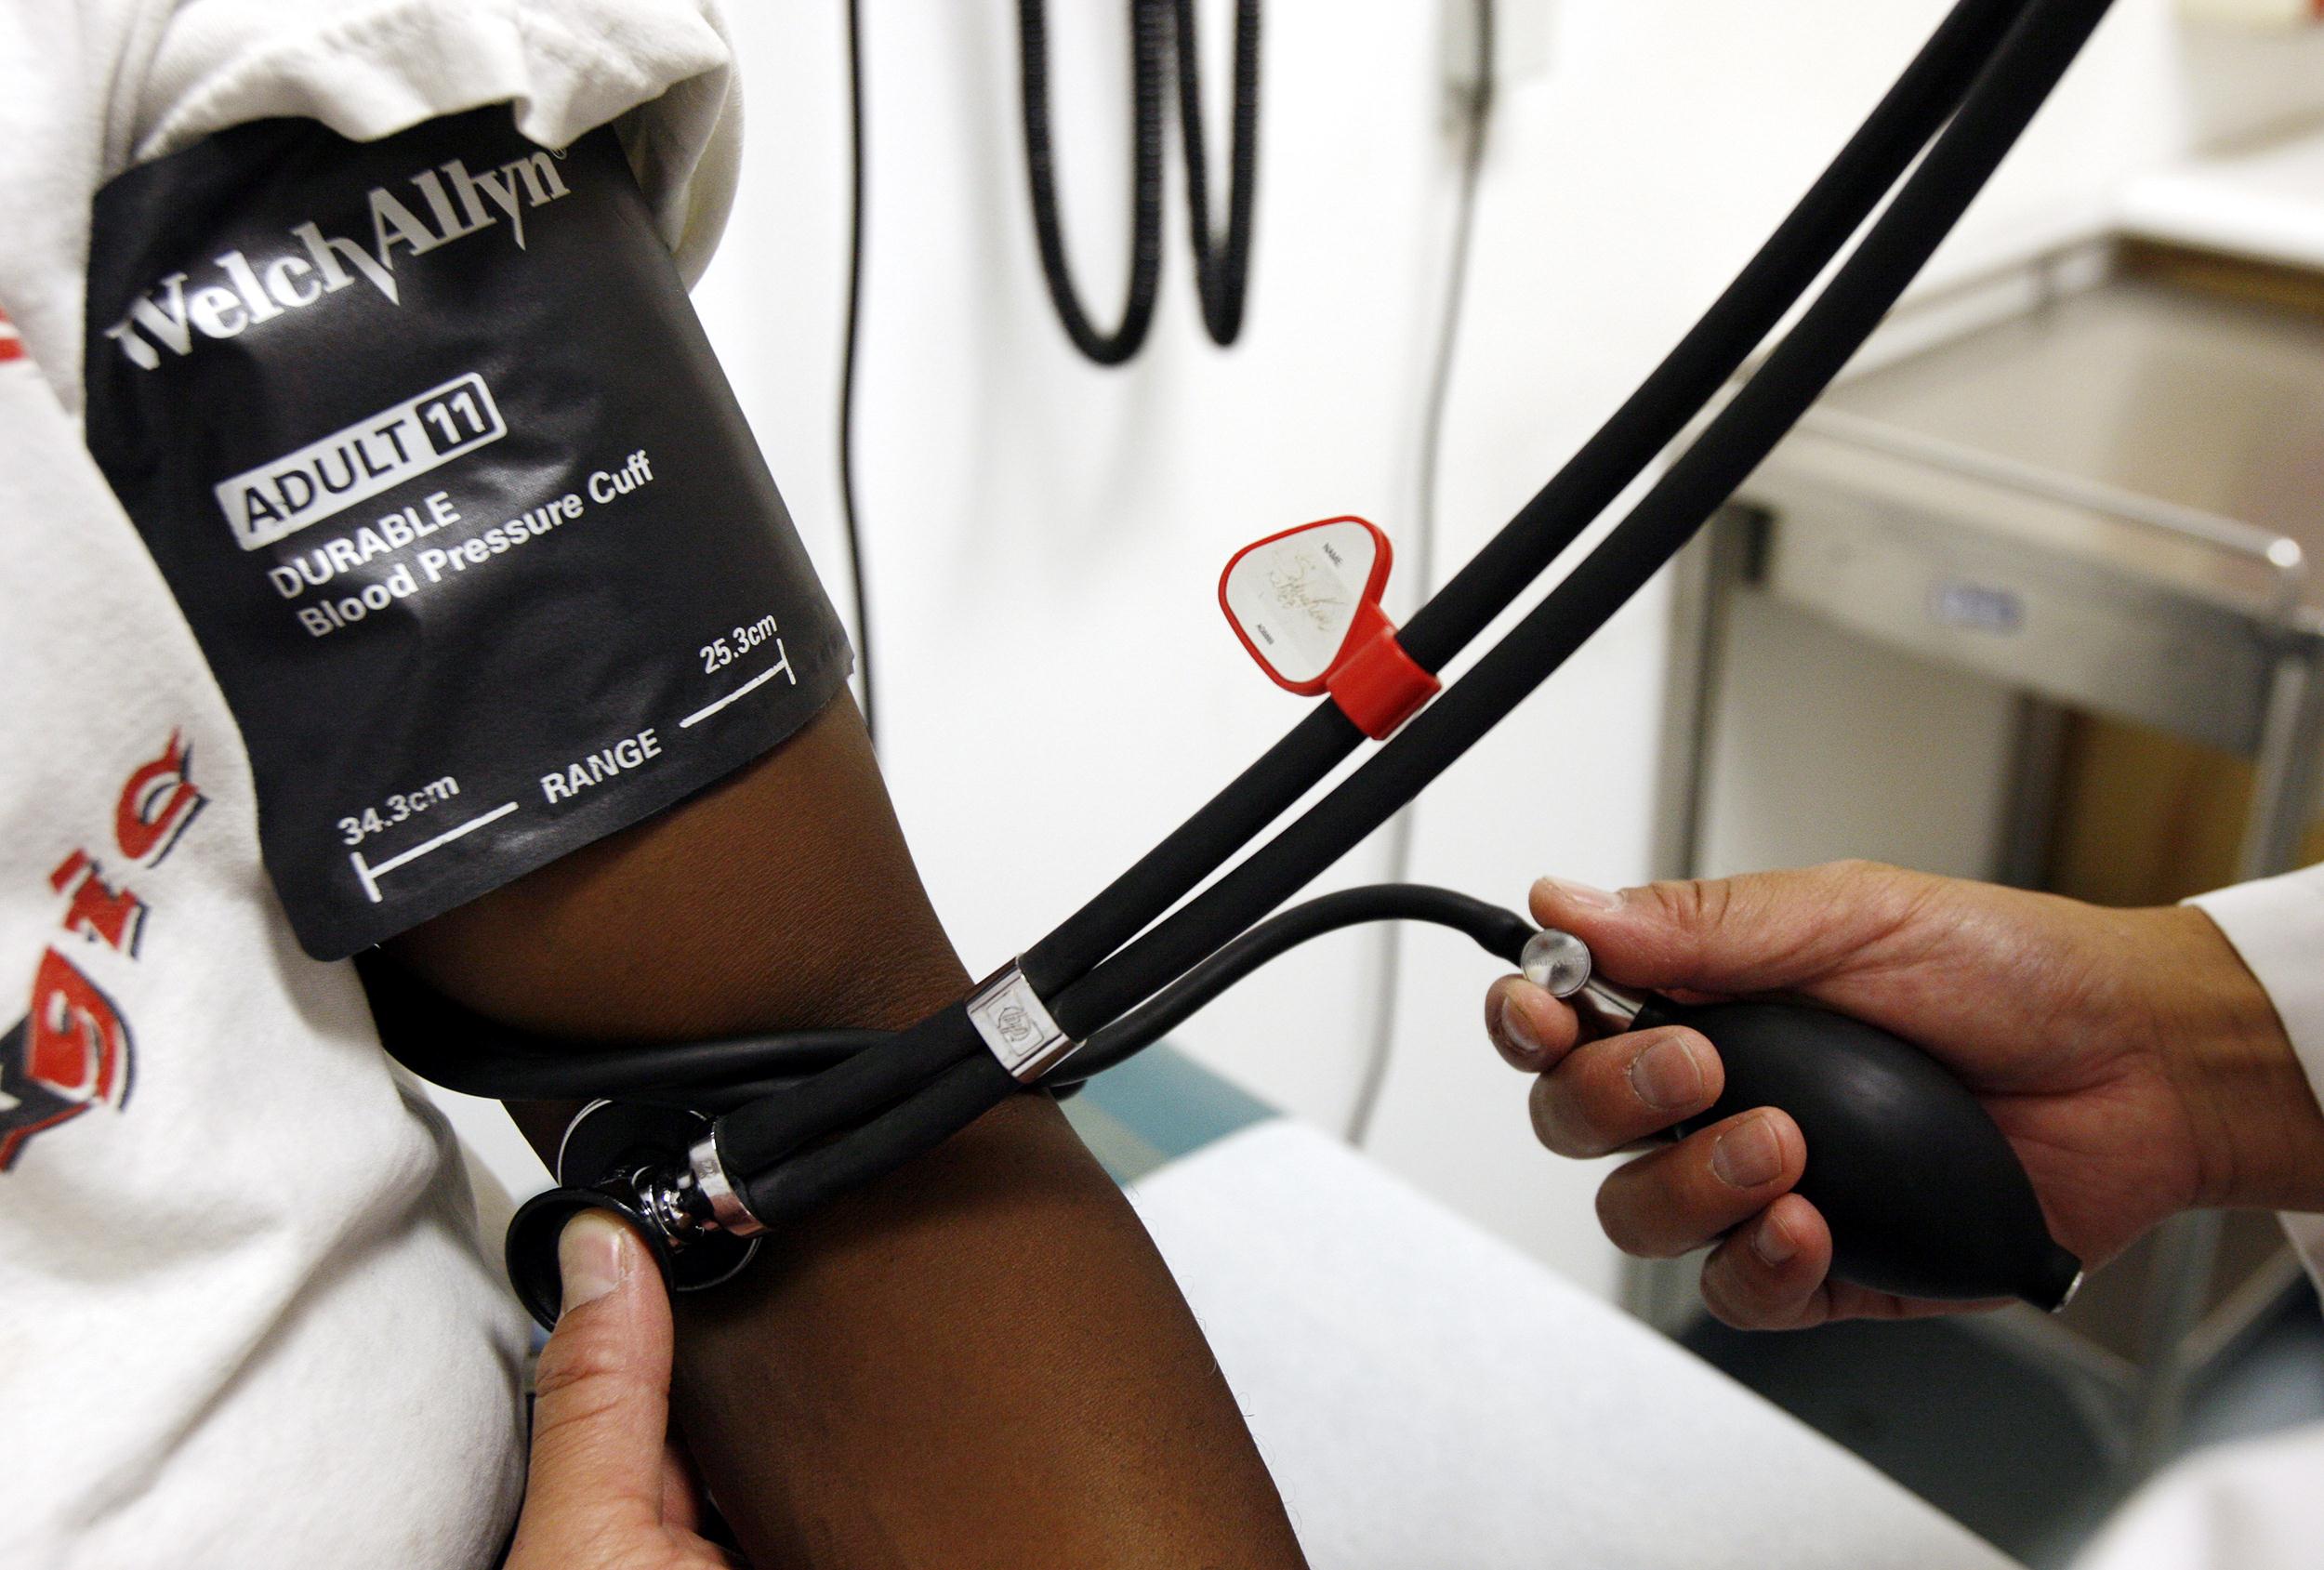 Study Details Confirm Lower Blood Pressure Is Better